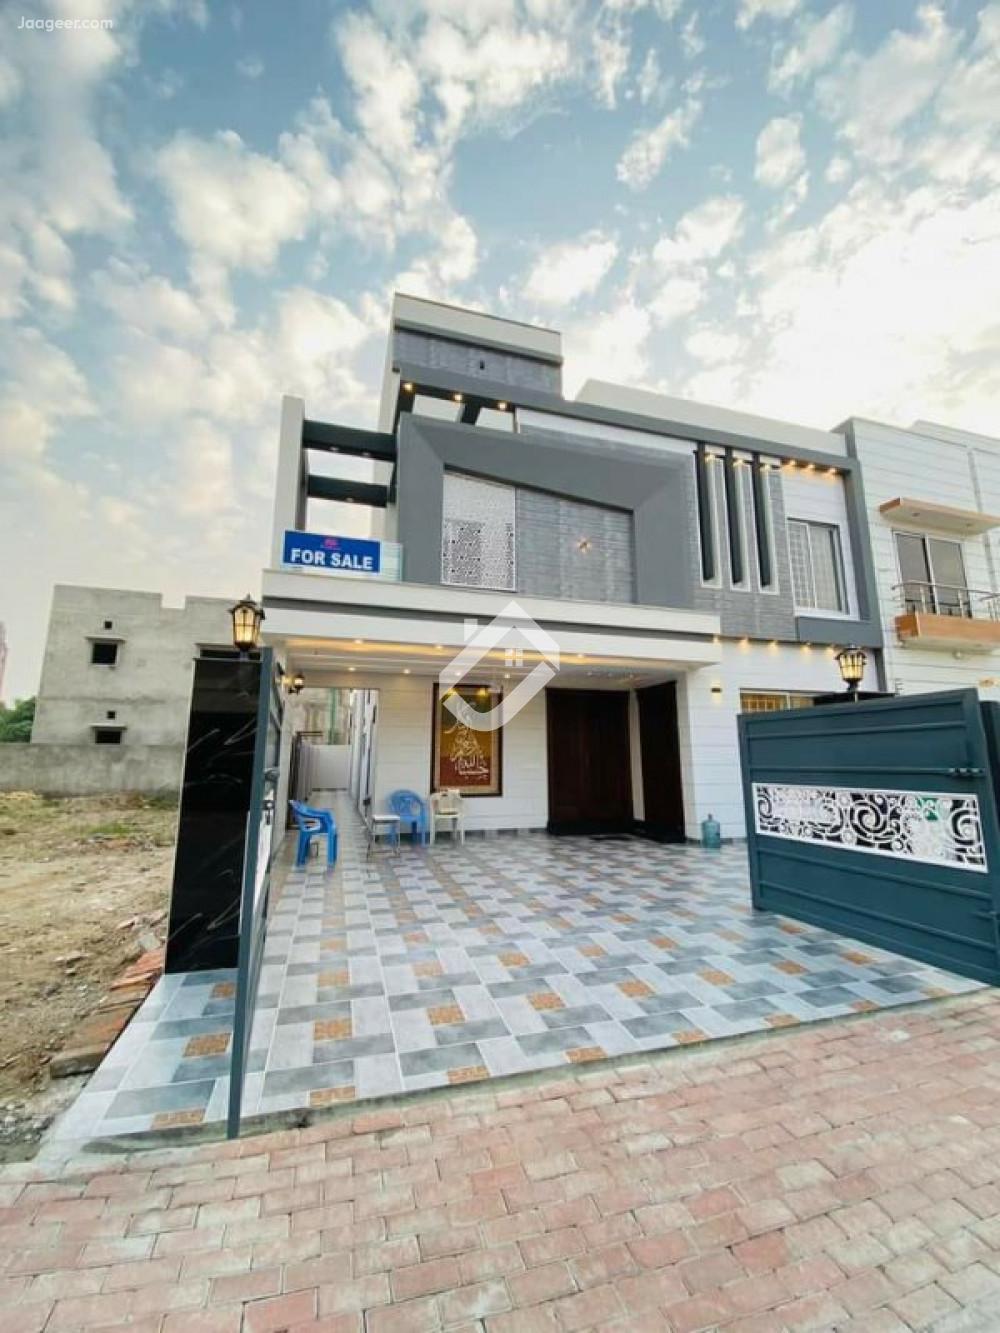 Main image 10 Marla Double Storey House For Sale In Bahria Town Sector-E Bahria Town, Lahore